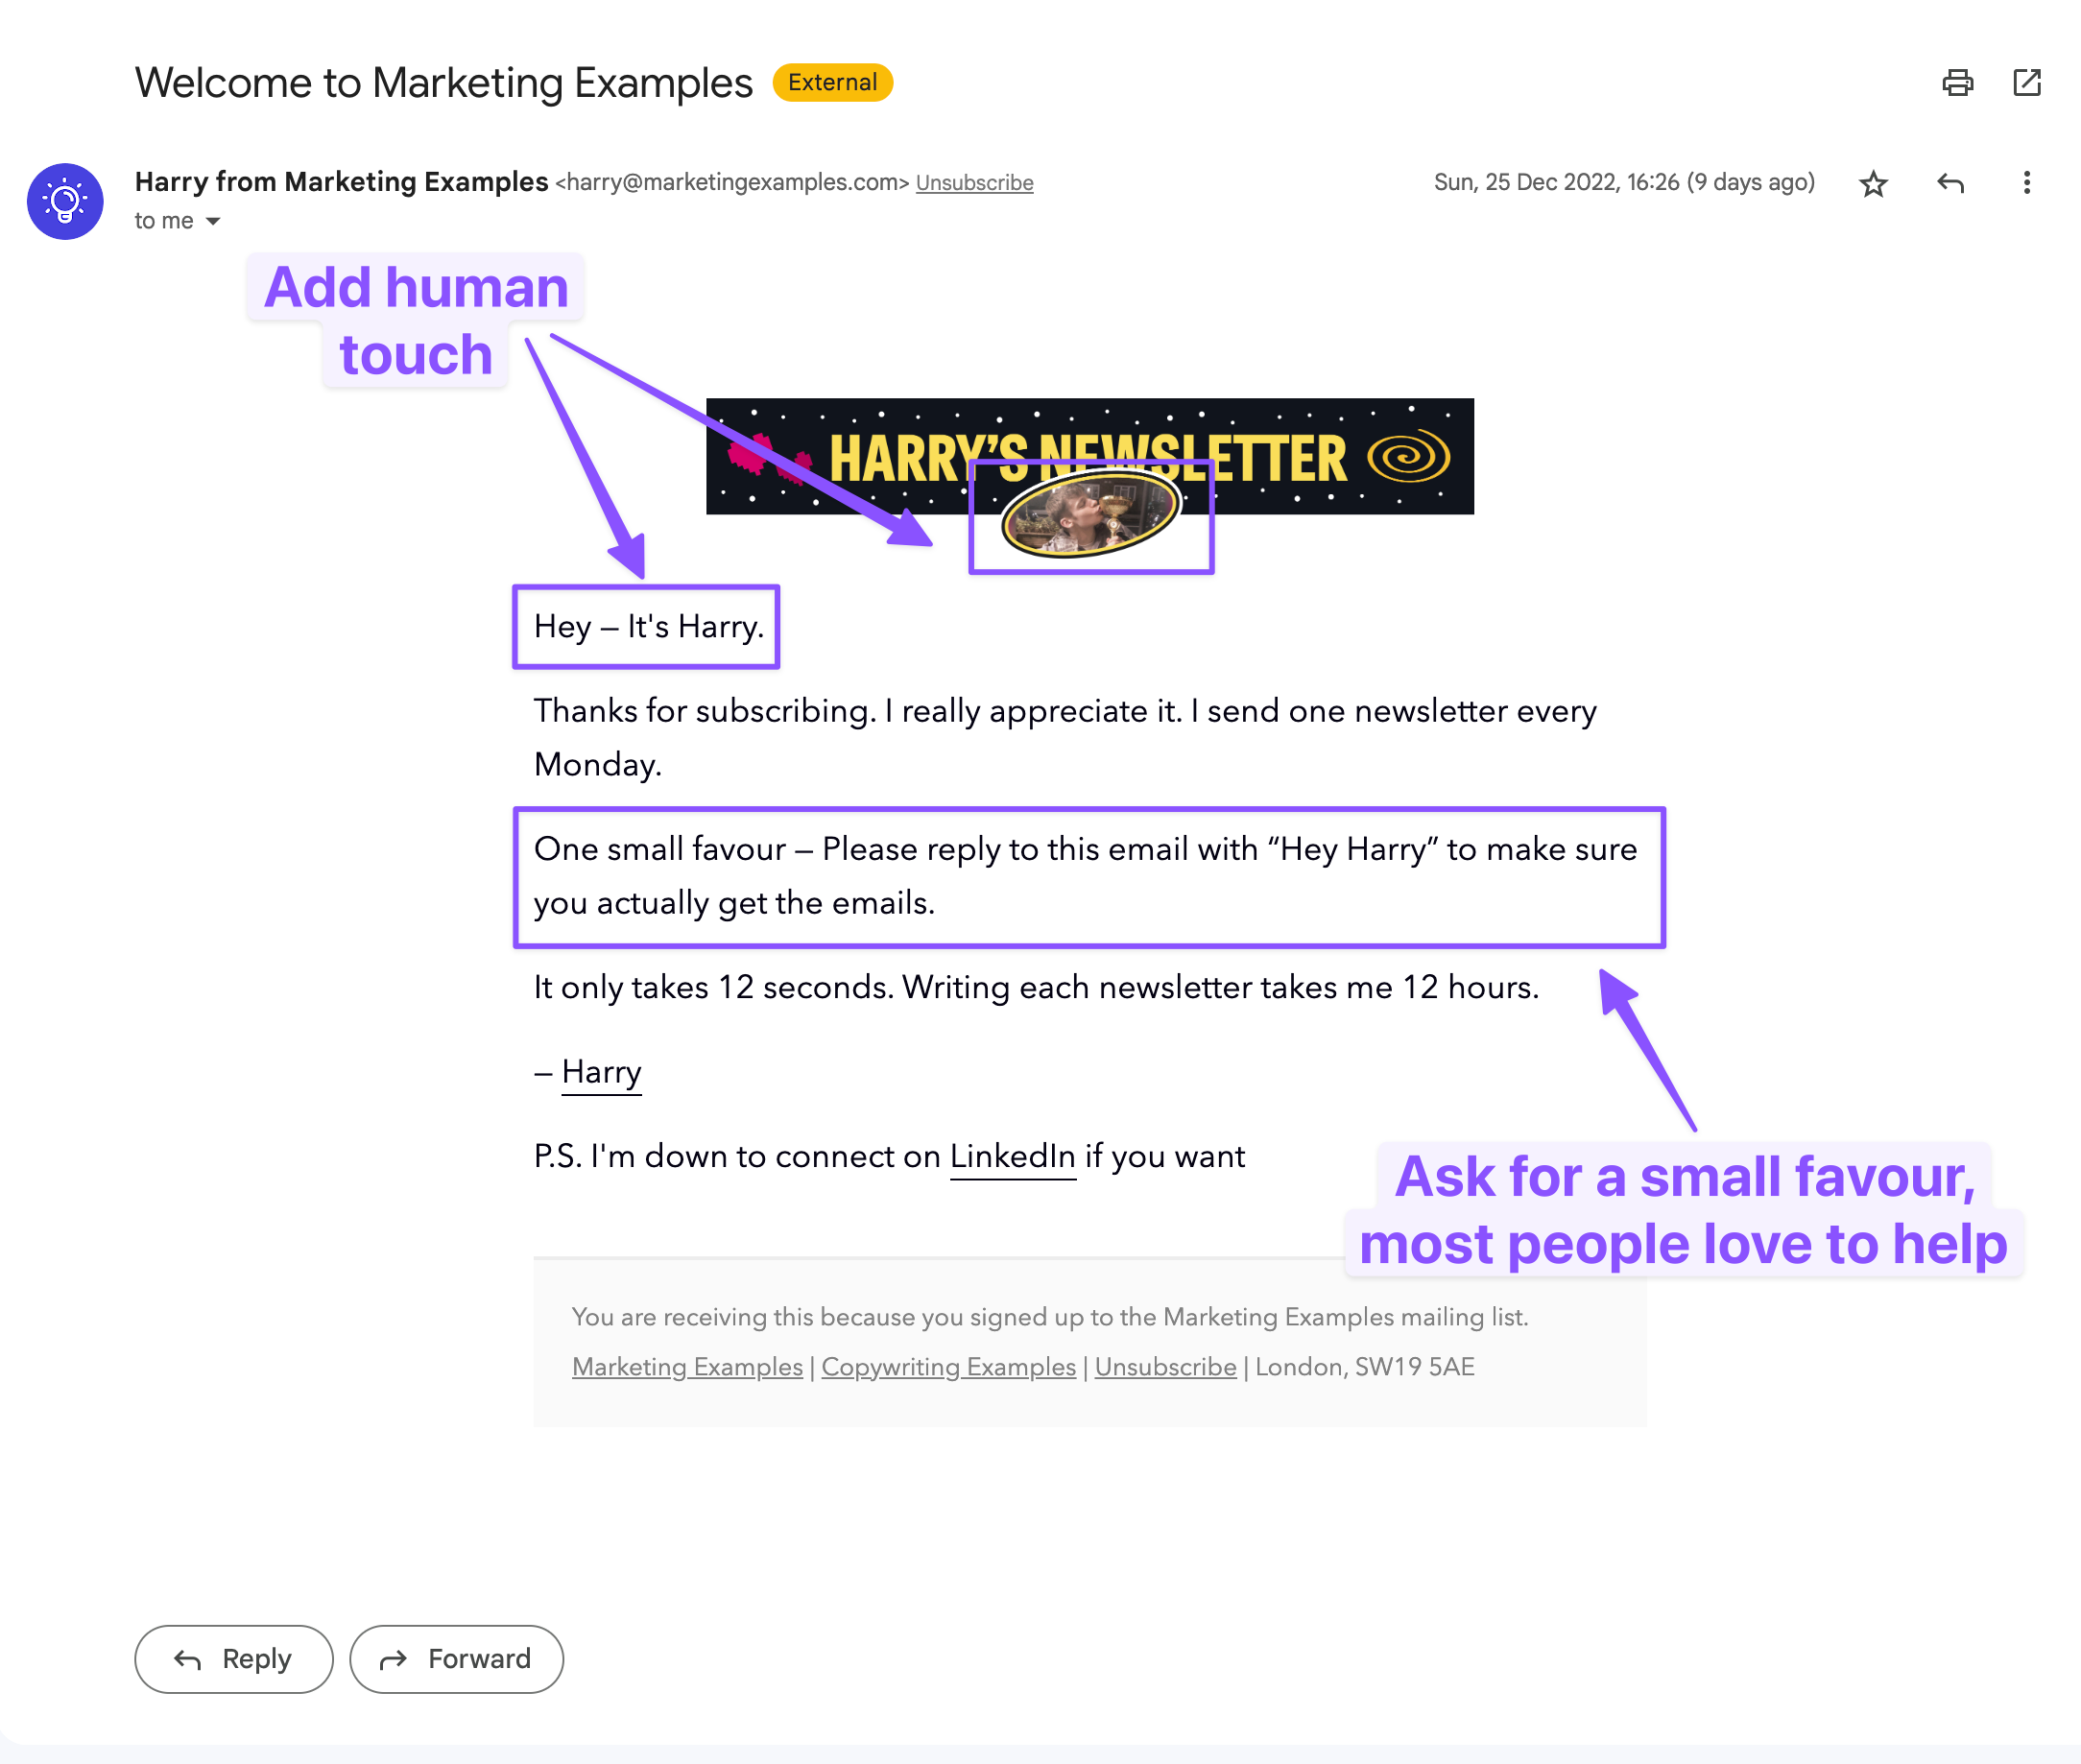 Marketing Examples welcome email